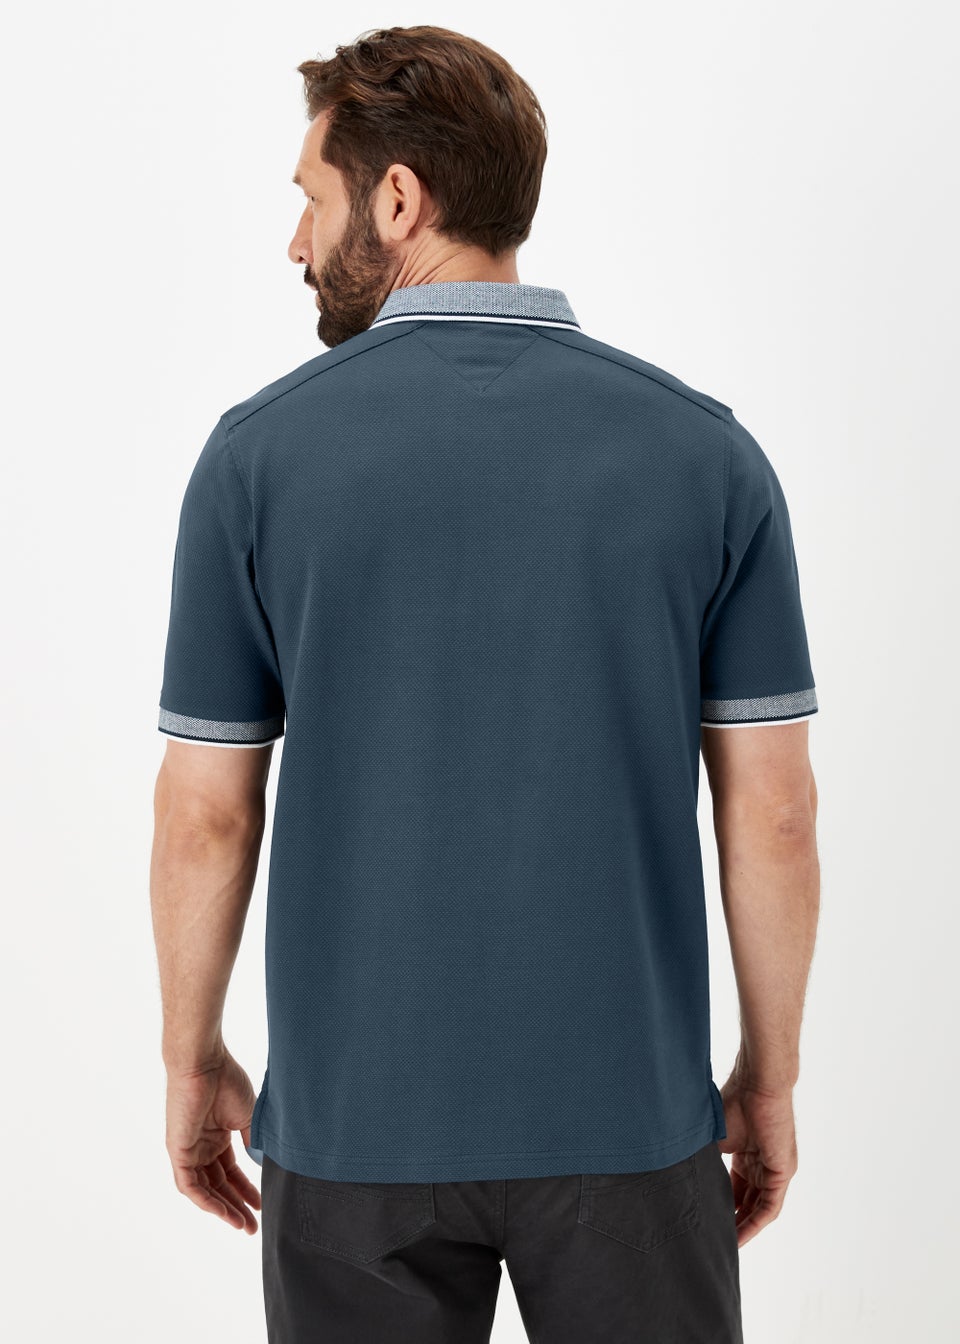 Lincoln Navy Tipped Polo Shirt